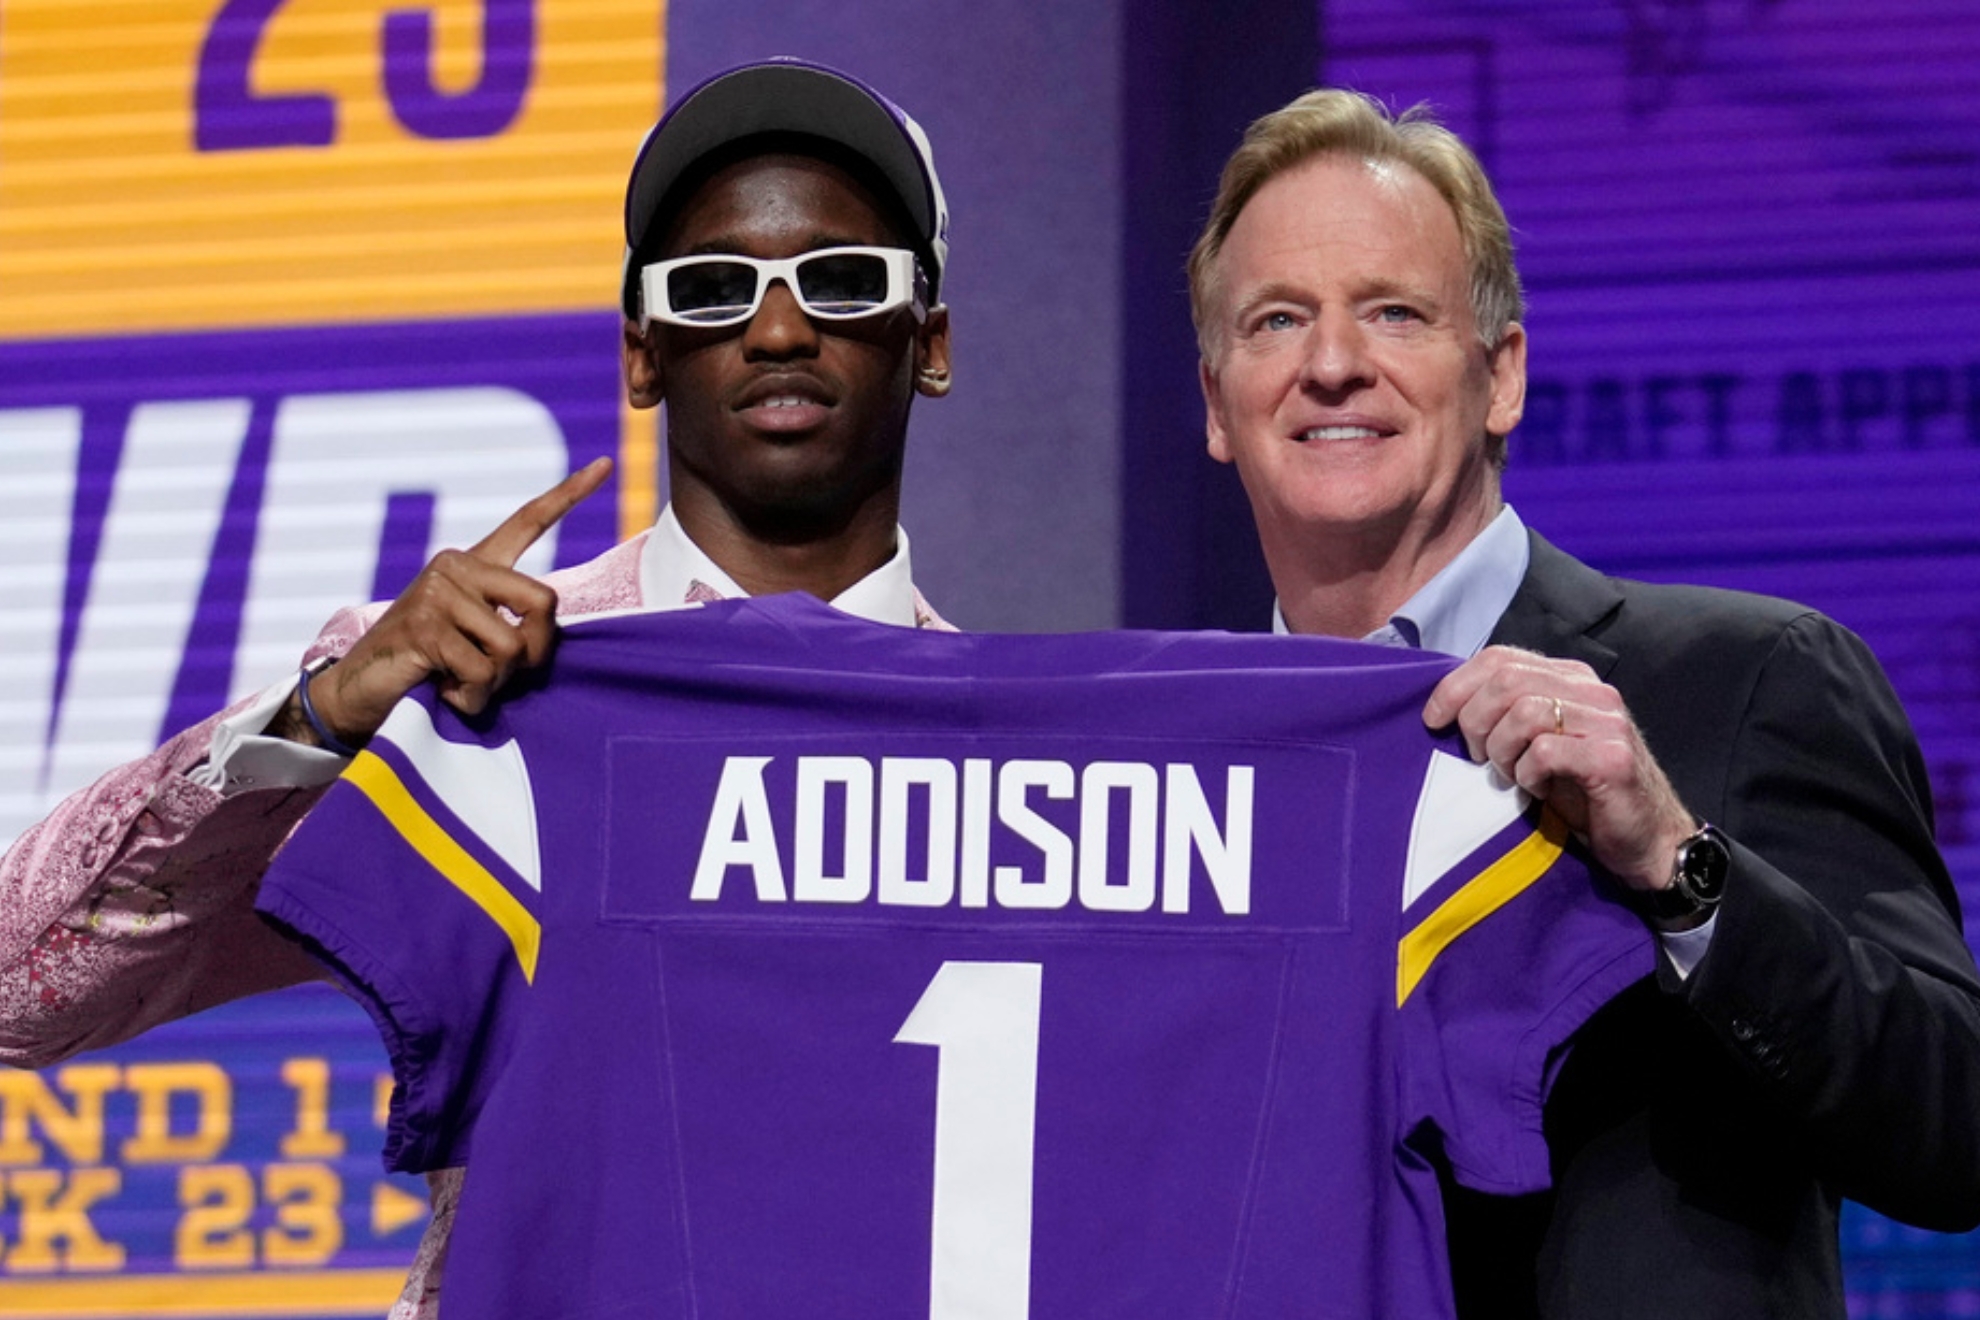 Addison was selected by the Vikings in this years draft to be a complimentary piece to Jefferson